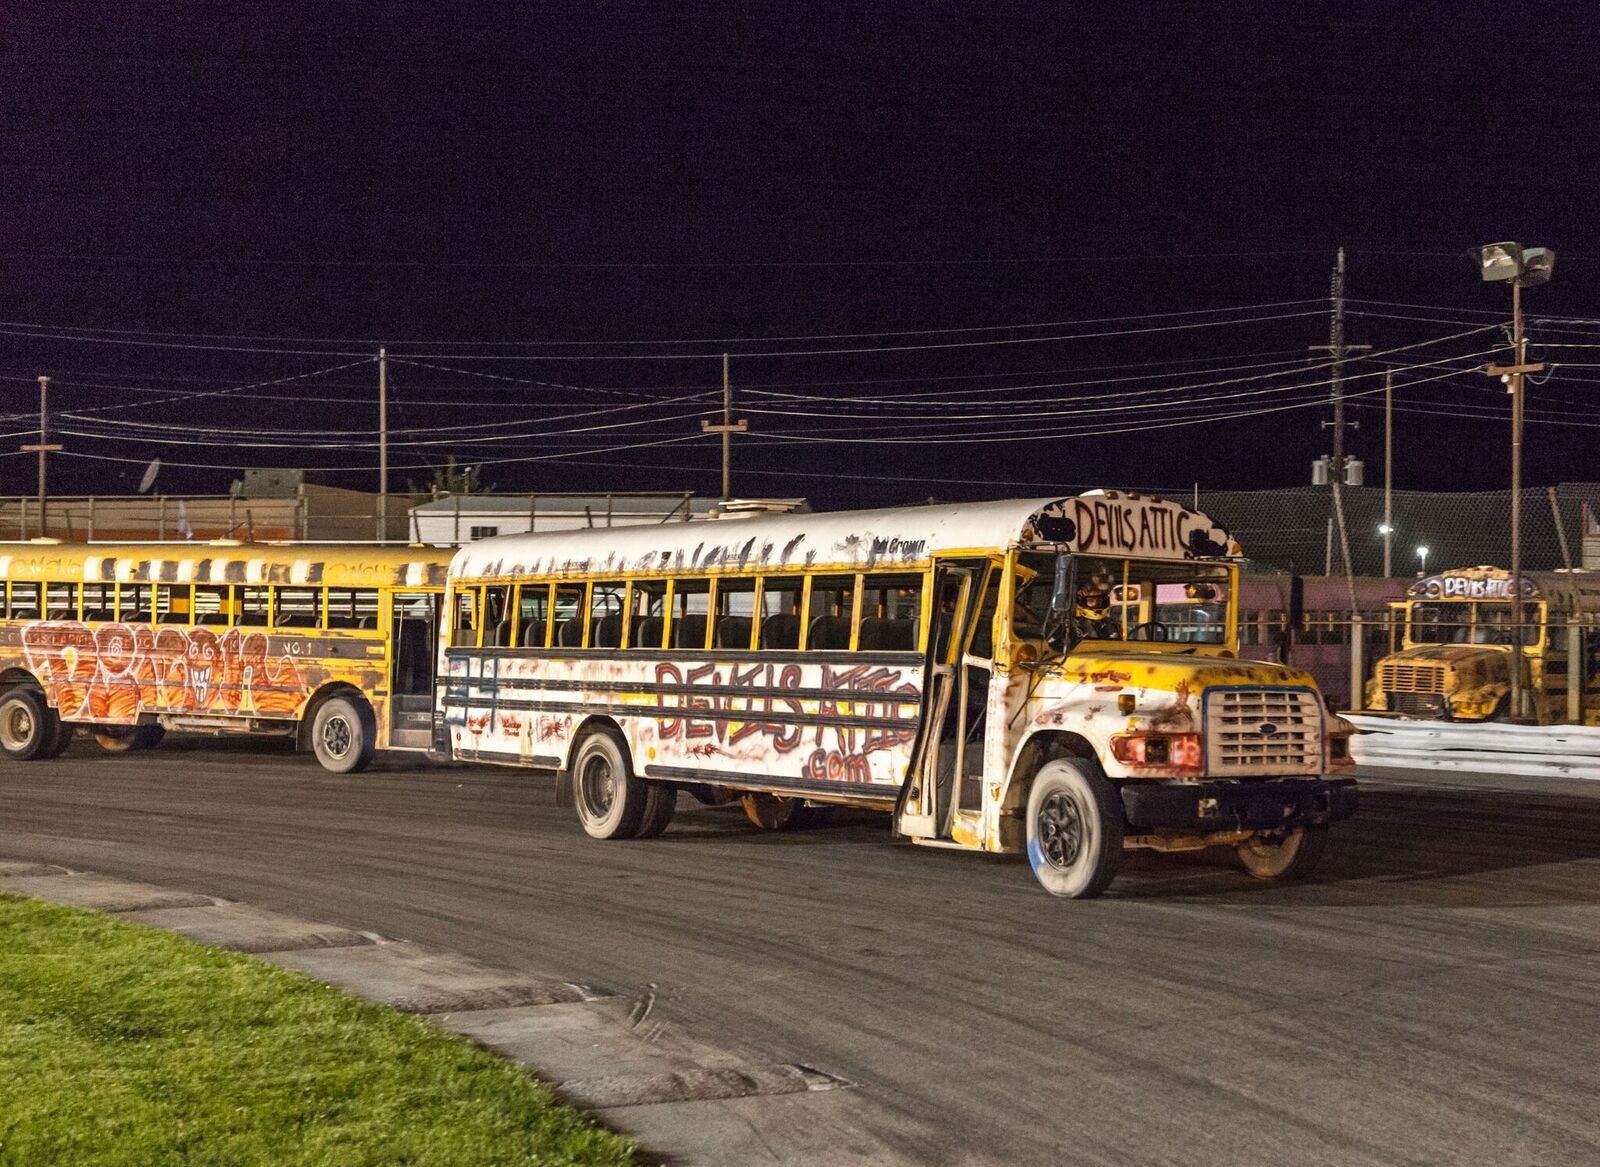 Two school buses racing as part of a scene from the film - photo by Bill Brymer